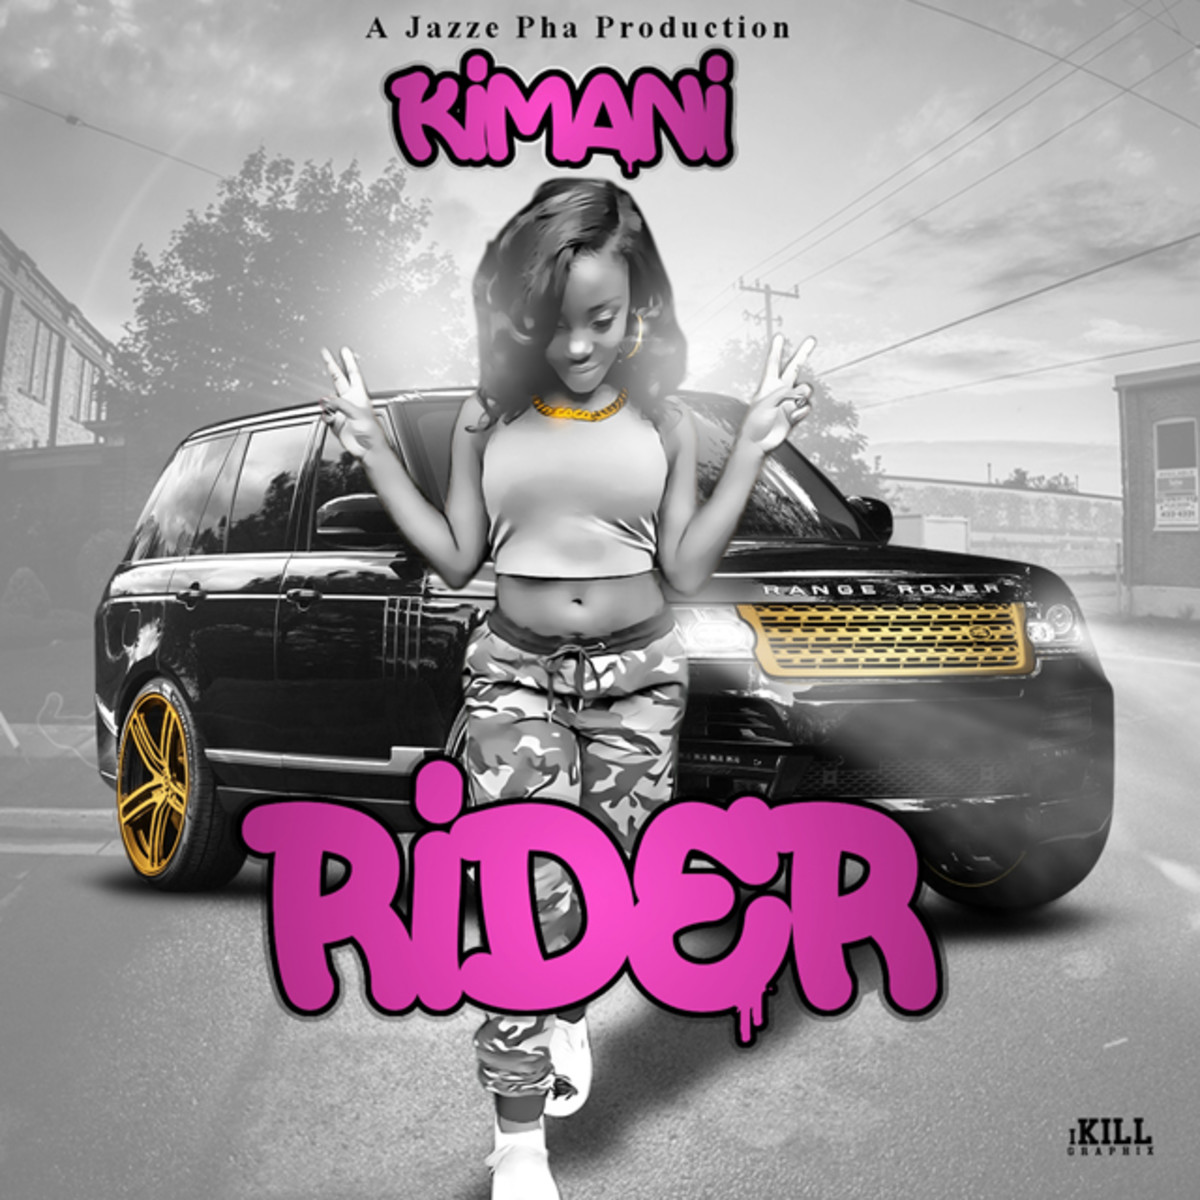 Kimani's new single, 'Rider' is earning Kimani great notices as the up and coming artist to watch in the music industry. 